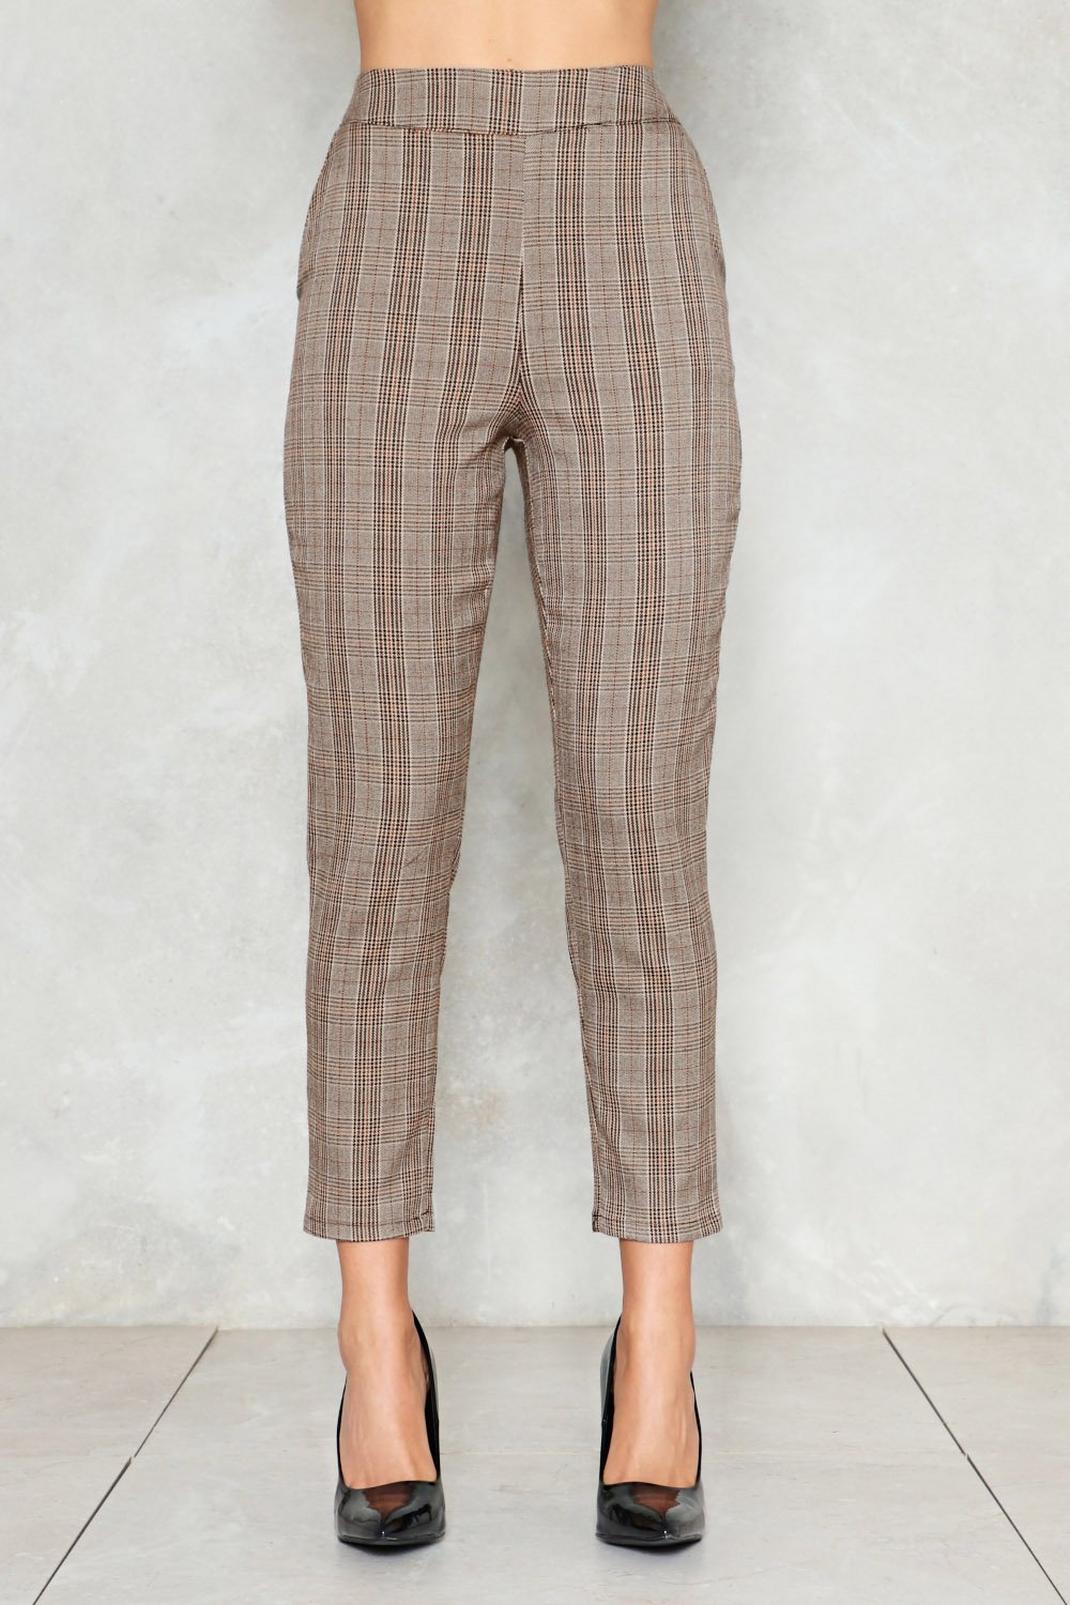 What the Check's the Matter Tapered Pants | Nasty Gal